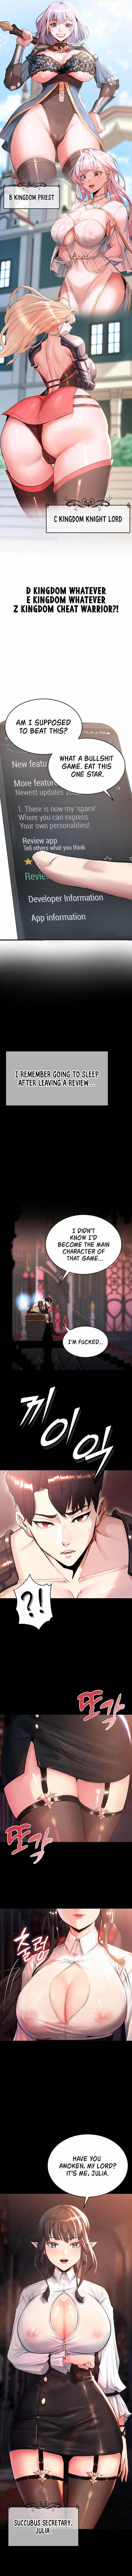 Corruption In The Dungeon - Chapter 1 Page 4